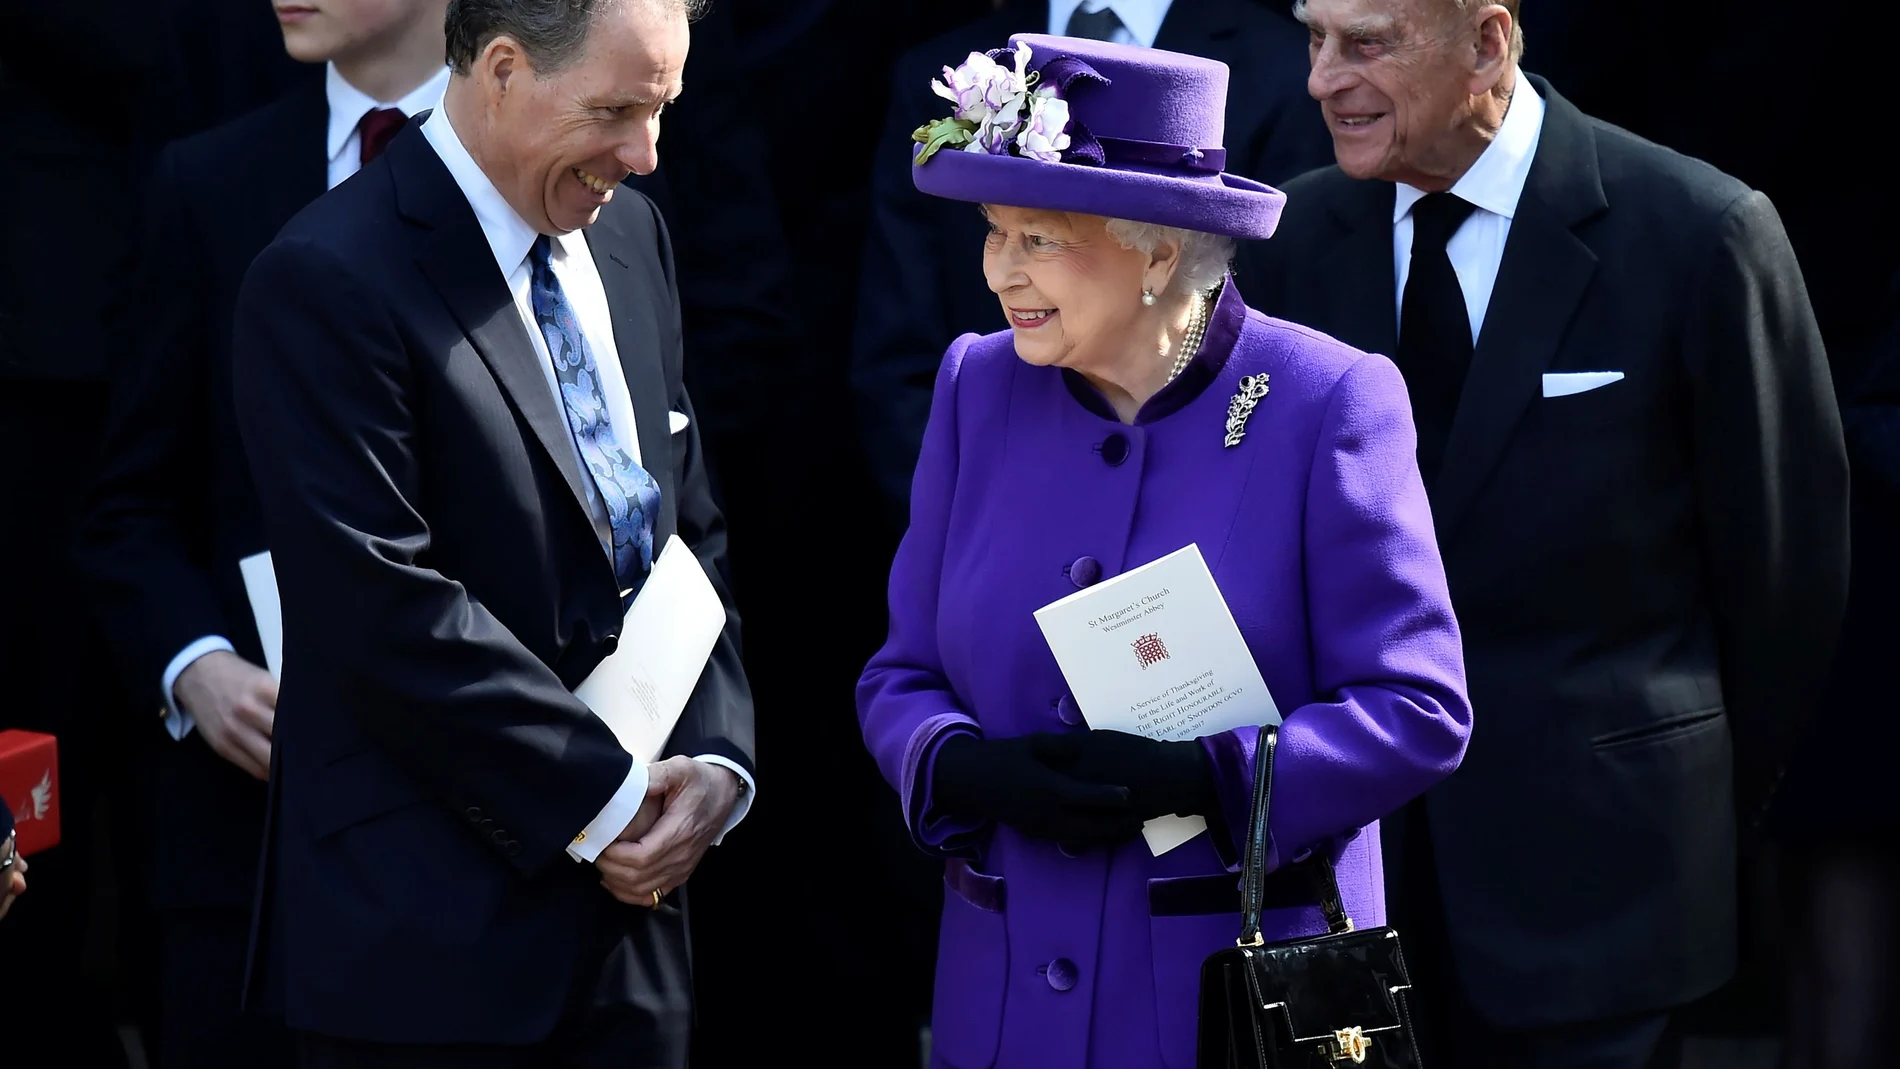 FILE PHOTO: David Armstrong-Jones speak to Britain's Queen Elizabeth and Prince Philip as they leave a Service of Thanksgiving for the life and work of Lord Snowdon at Westminster Abbey in London